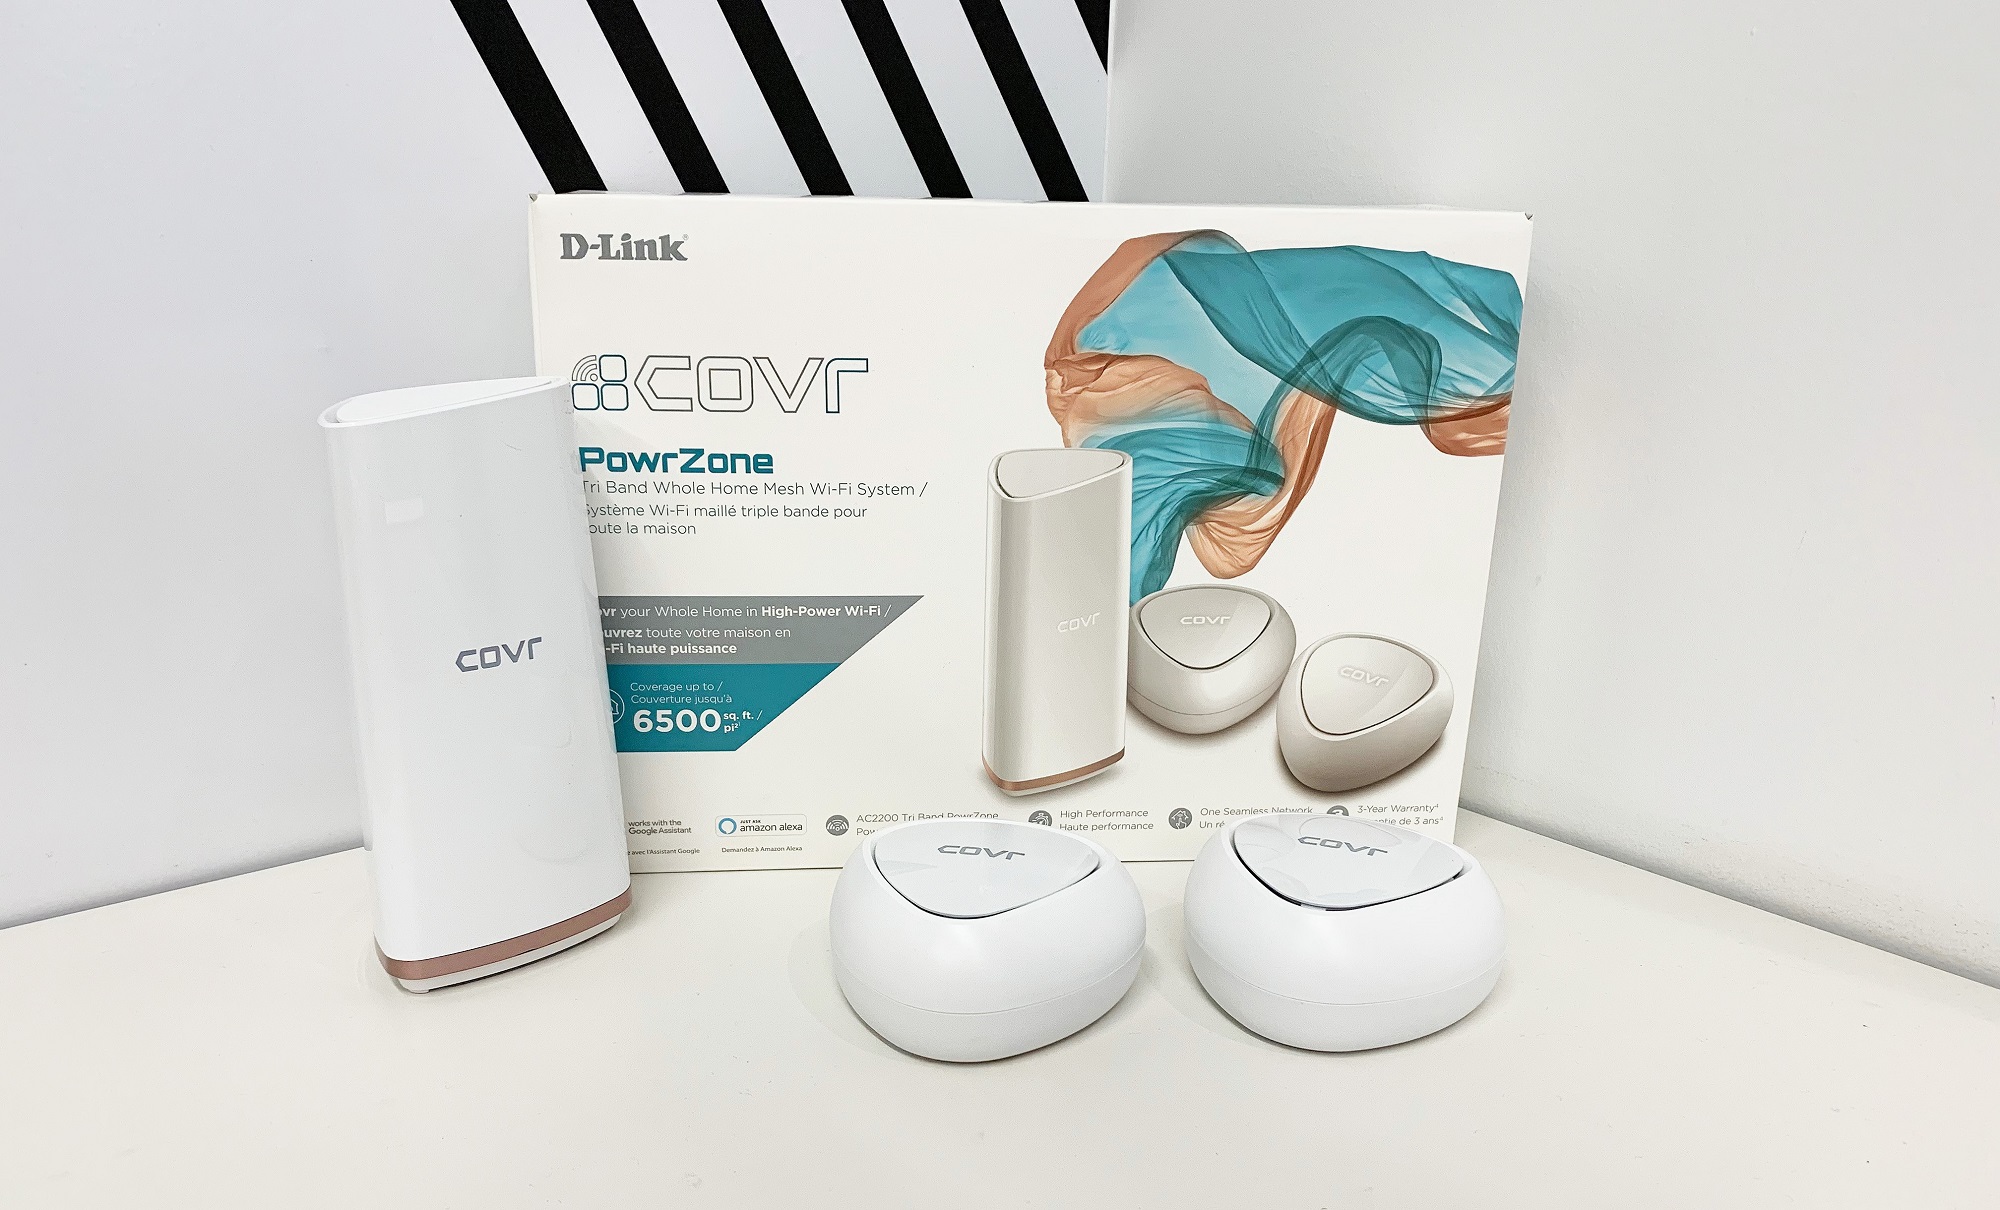 D-Link whole home mesh wi-fi package wtih Covr points